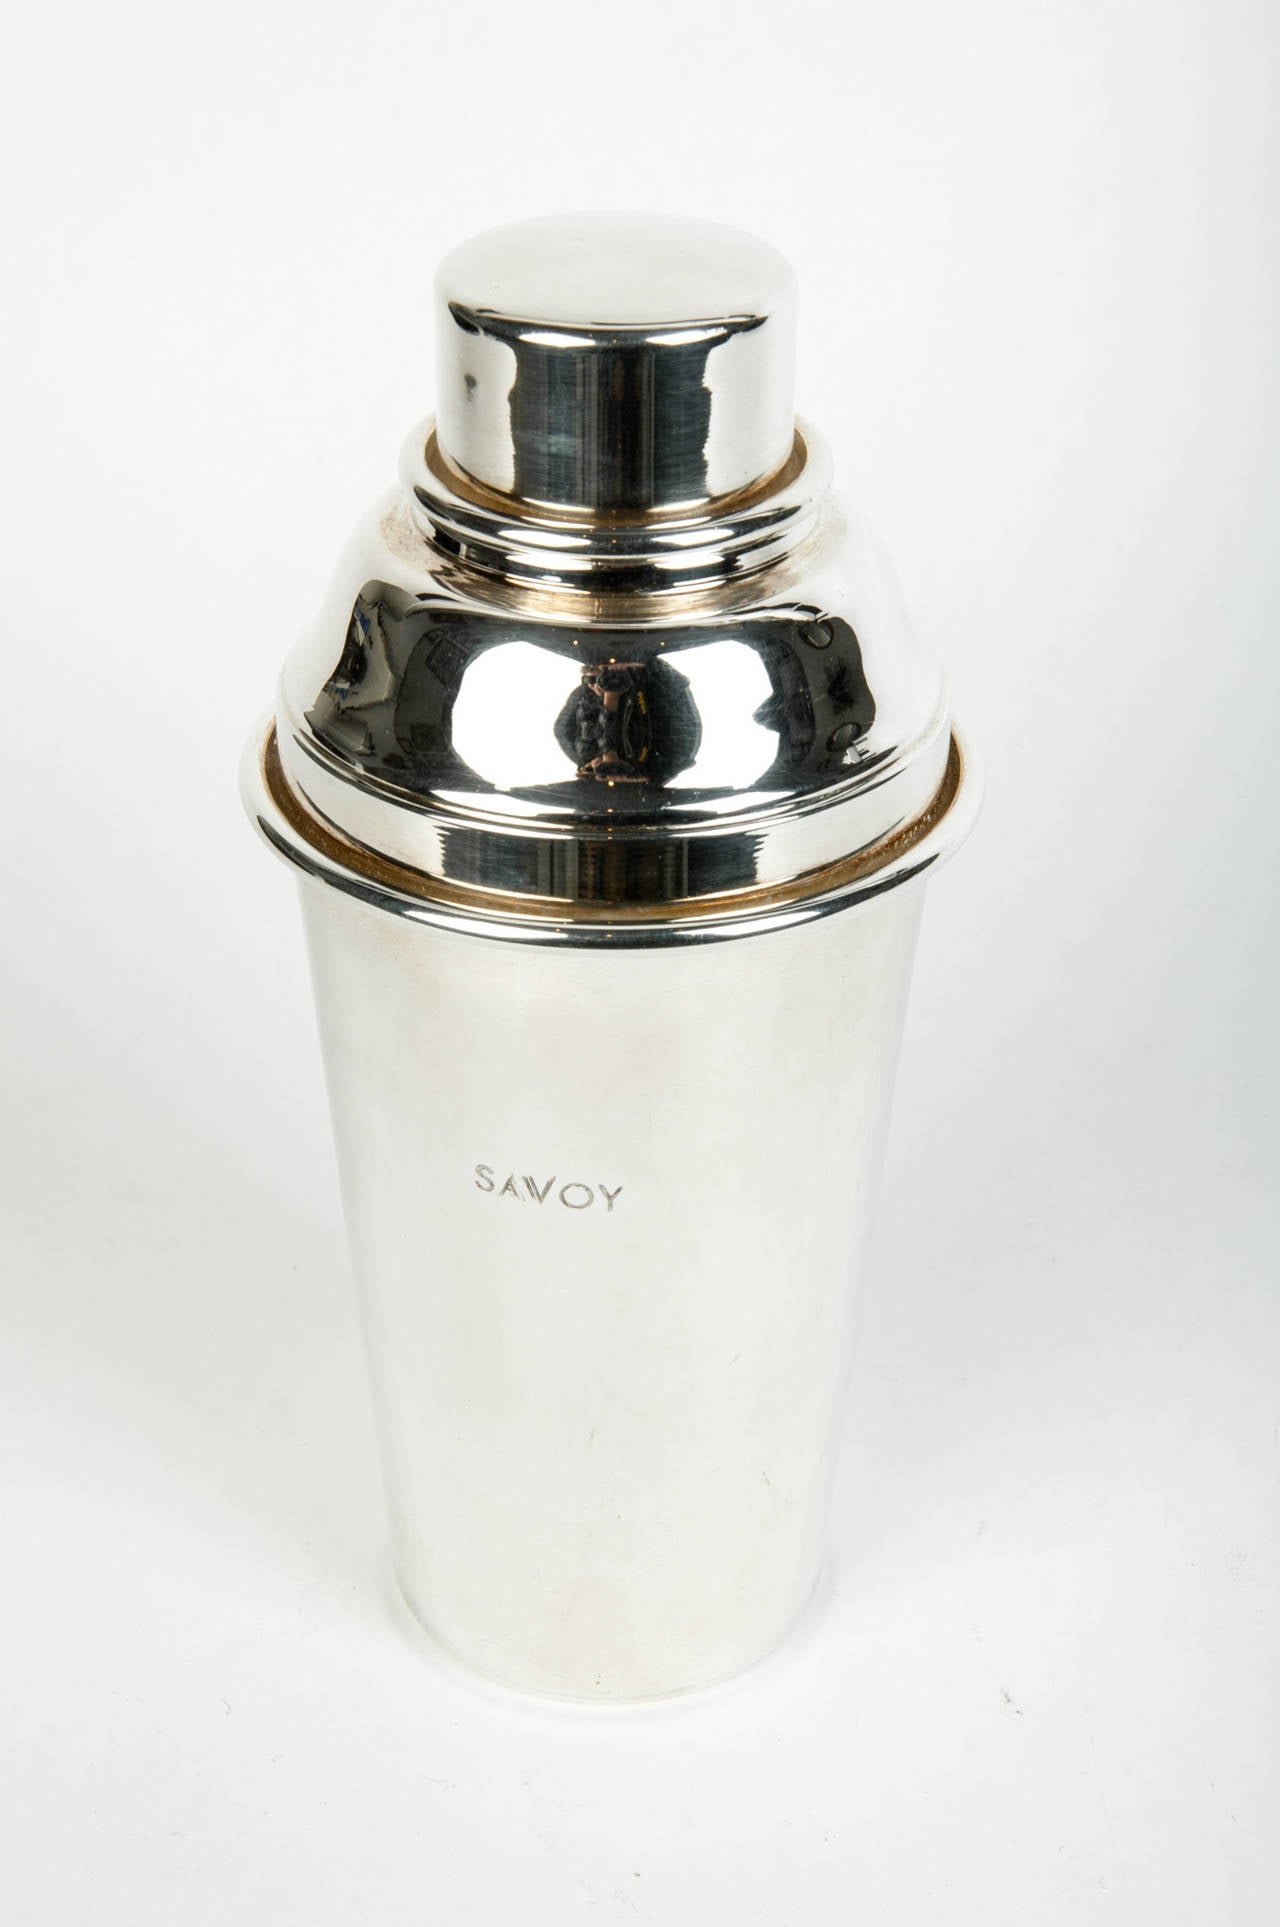 A vintage 1940s English pewter cocktail shaker from the Savoy hotel in London.